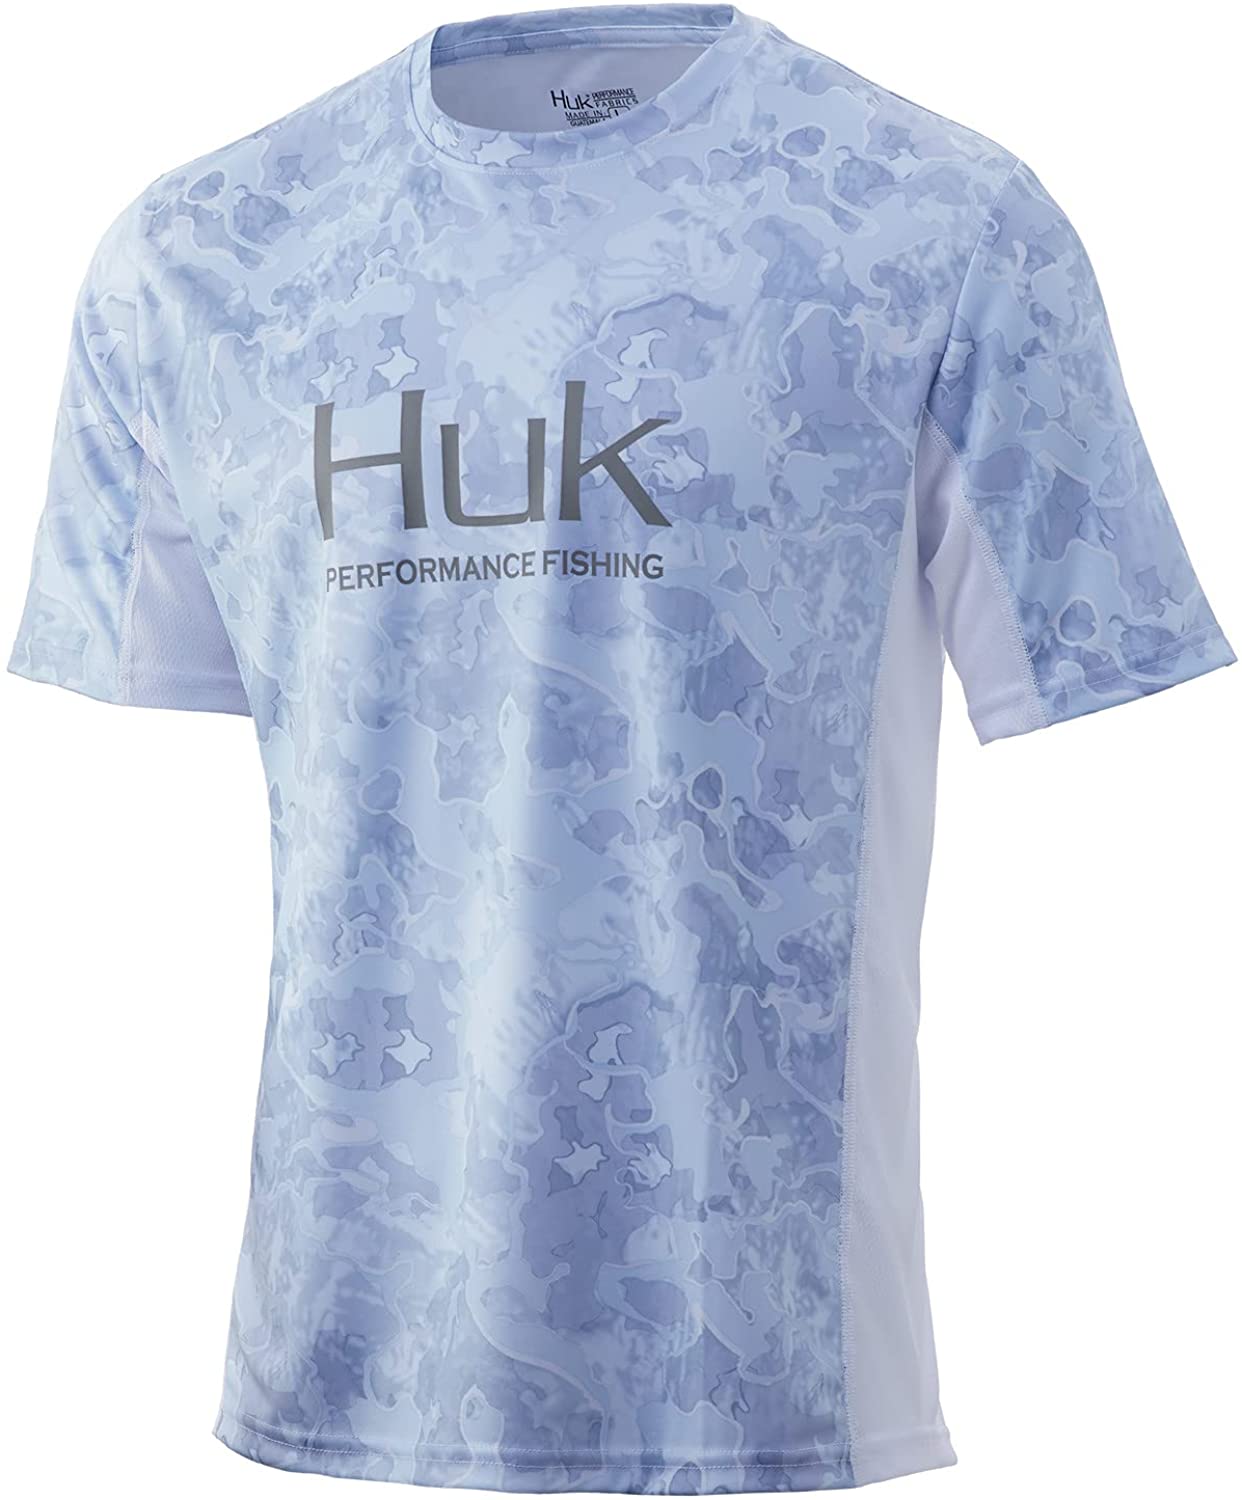 30% Off HUK Icon X Camo Performance Fishing Shirt--Pick Color/Size 